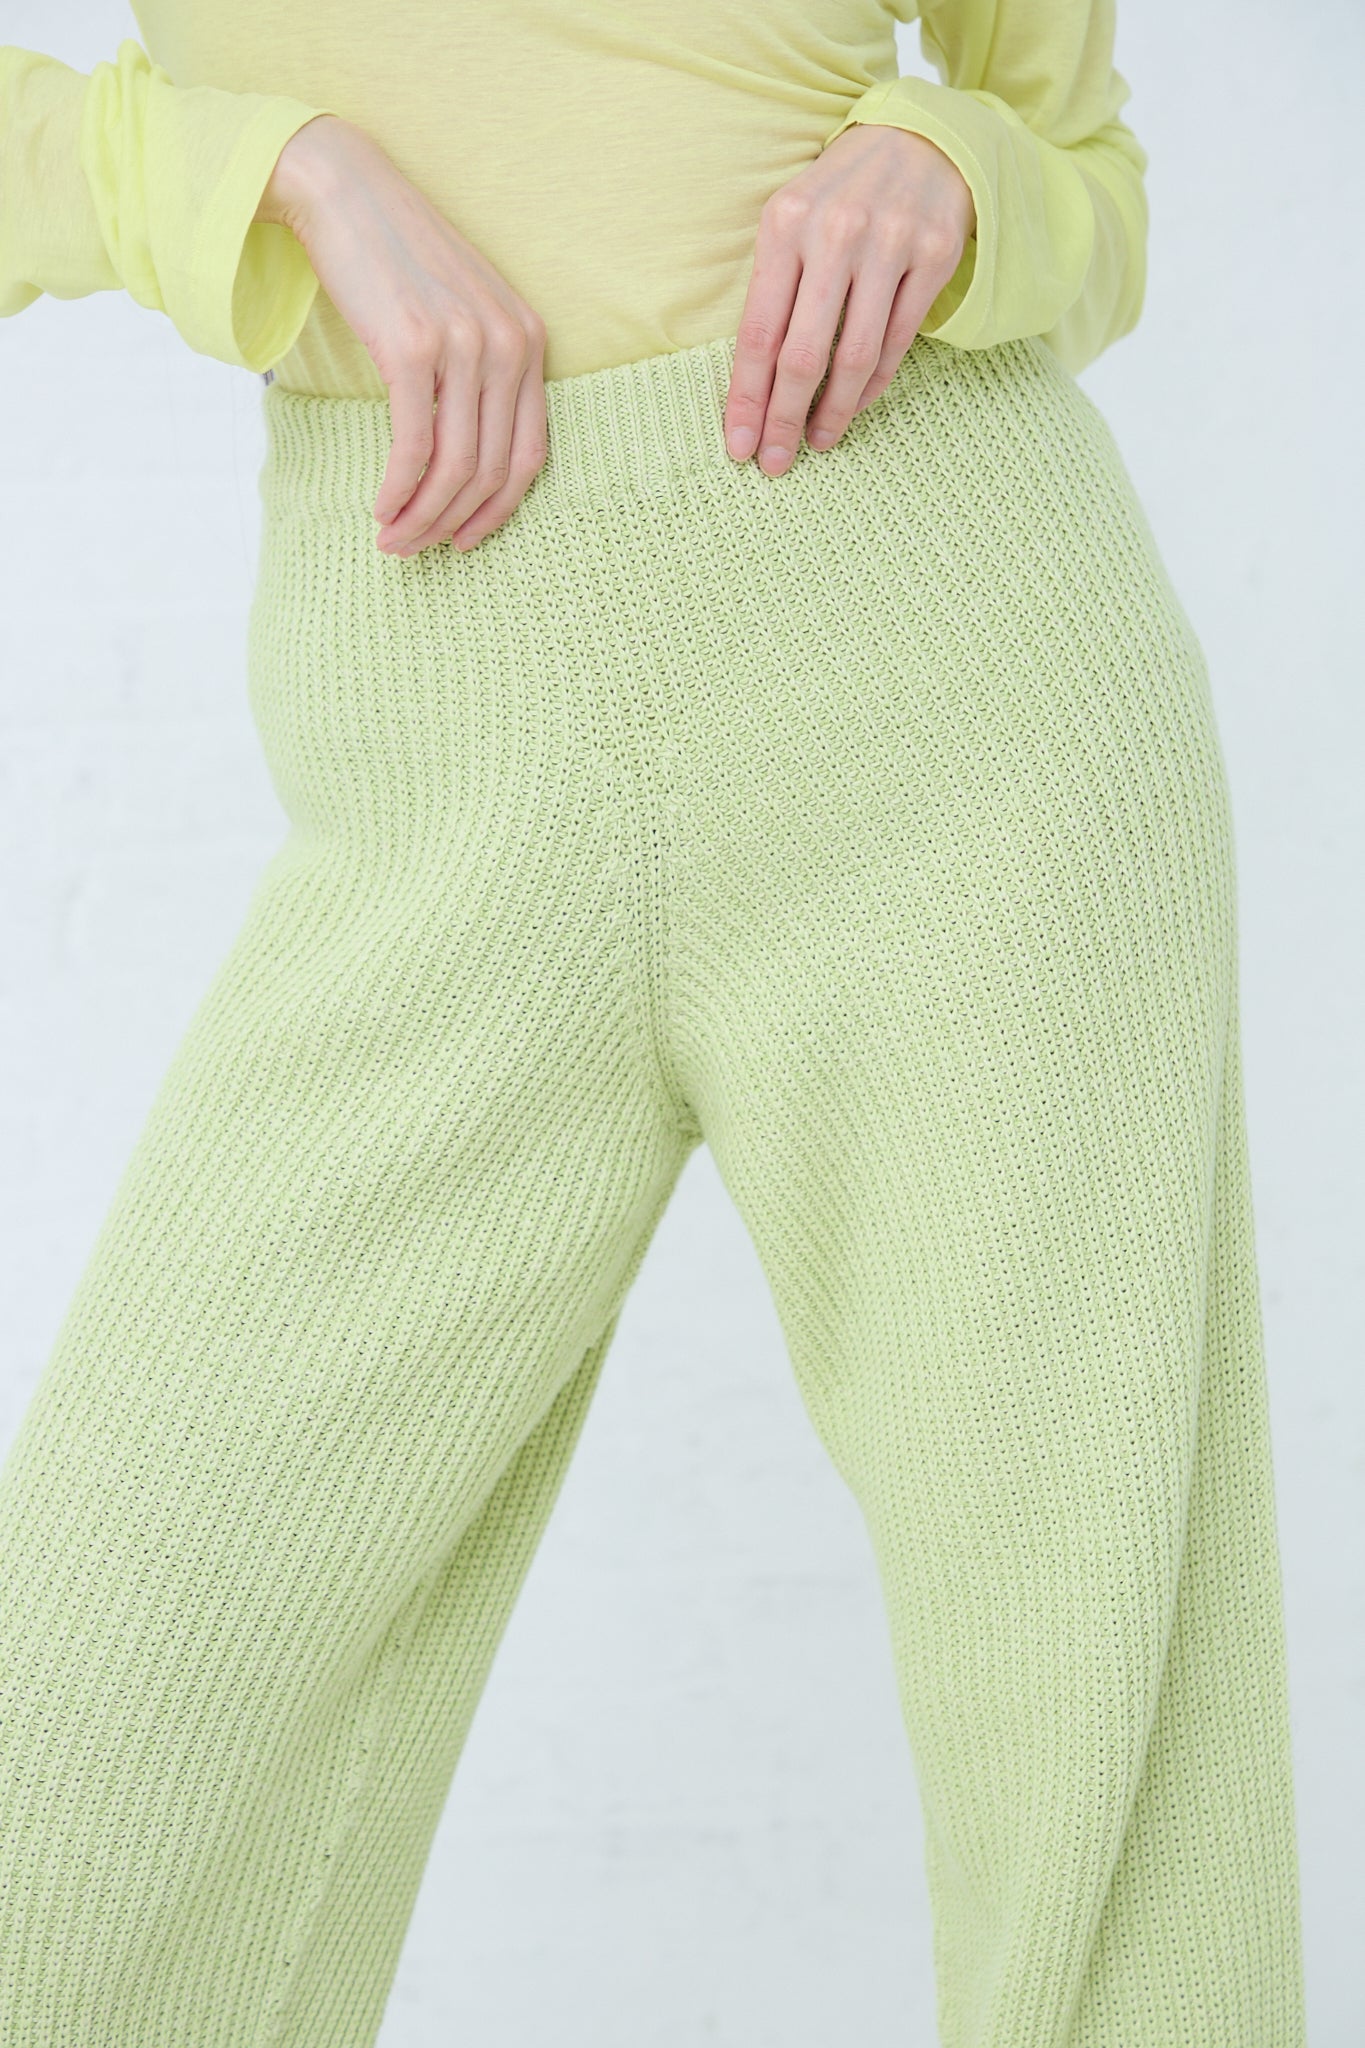 A woman wearing Baserange's sustainably produced Cotton Dodd Pant in Mimosa, a lime green ribbed pant with an elasticated waist, and a yellow top made from organic cotton.